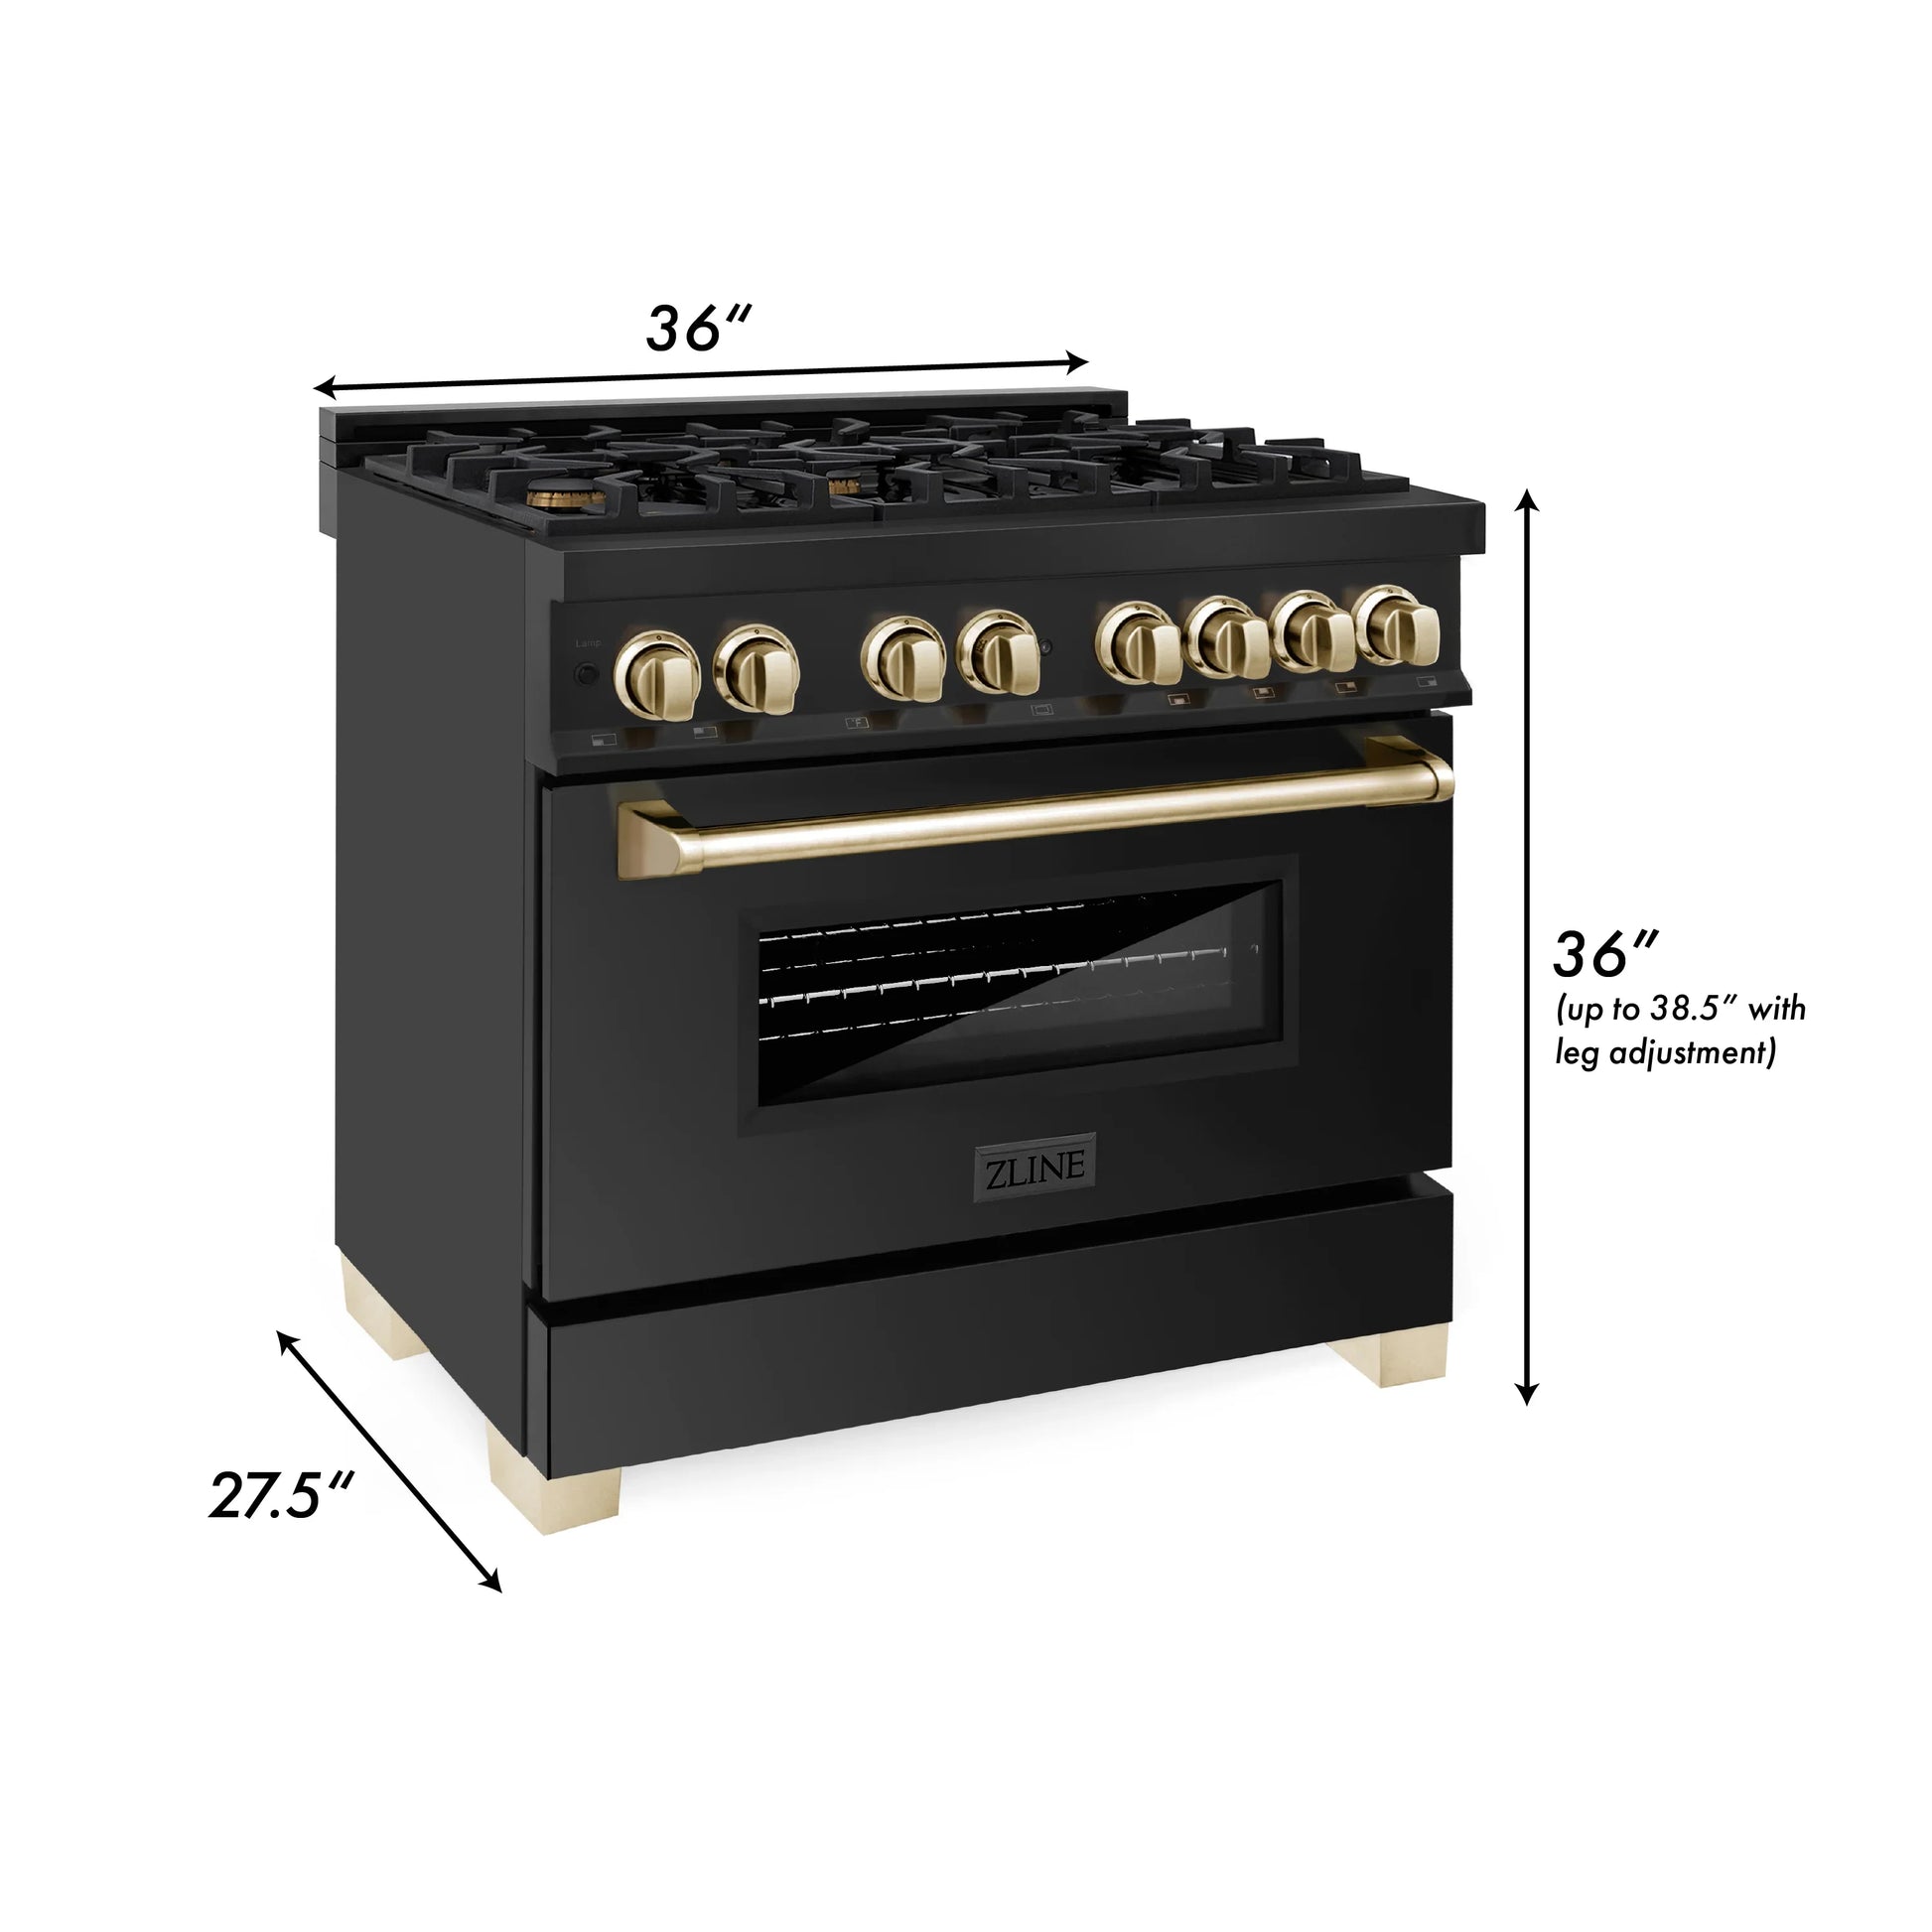 ZLINE Autograph Edition 36" Dual Fuel Range with Gas Stove and Electric Oven - Black Stainless Steel, Champagne Bronze Accents